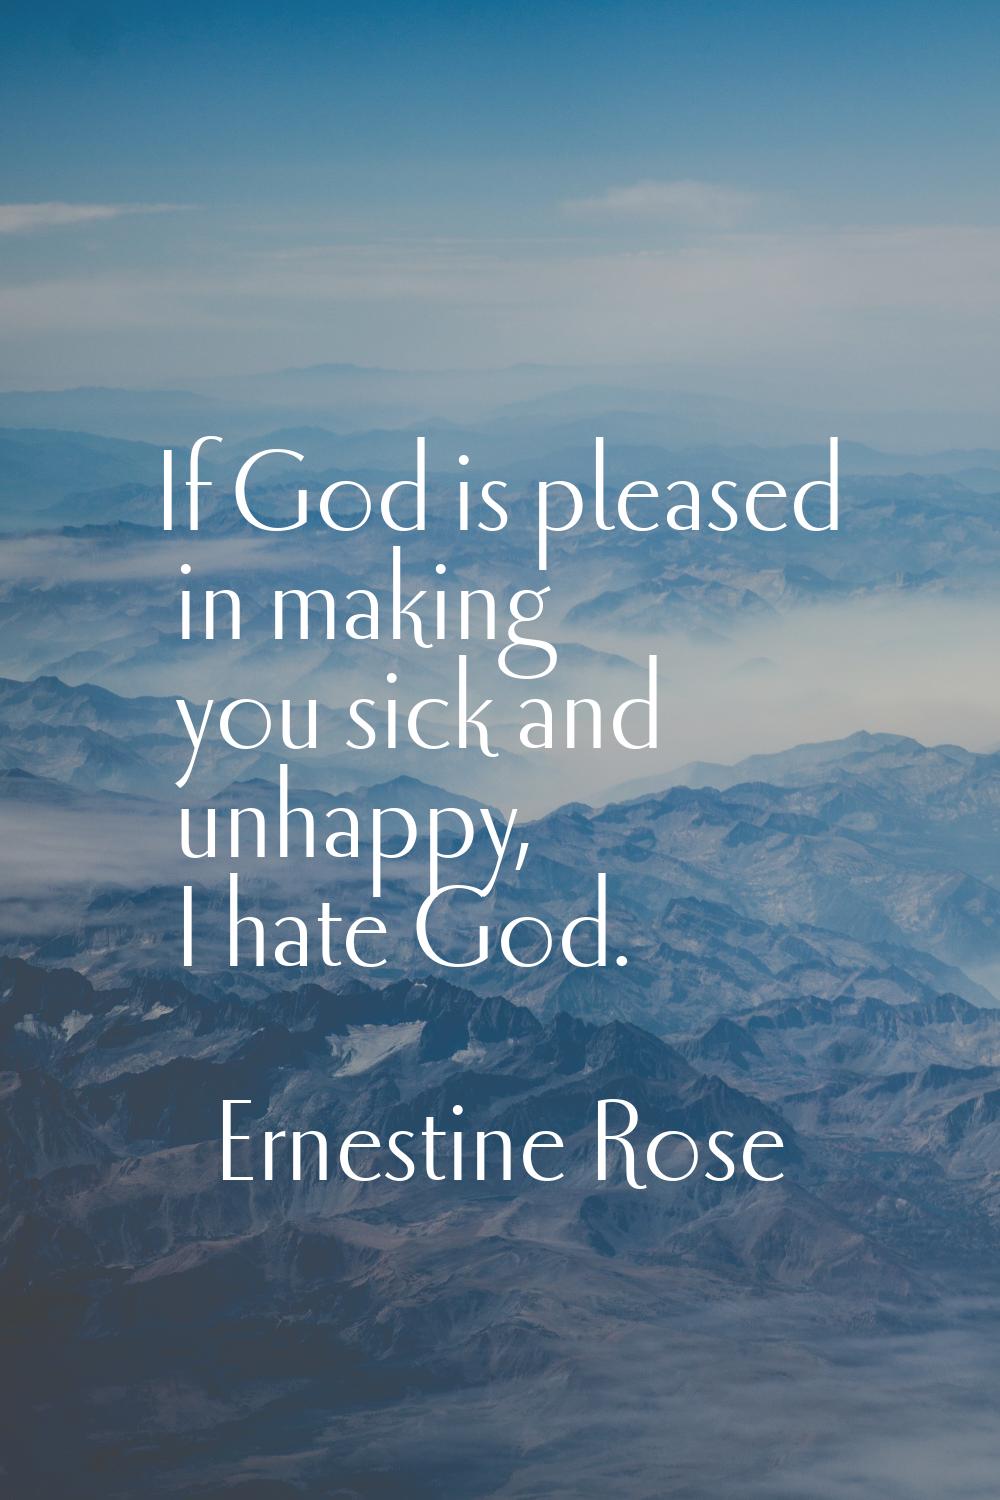 If God is pleased in making you sick and unhappy, I hate God.